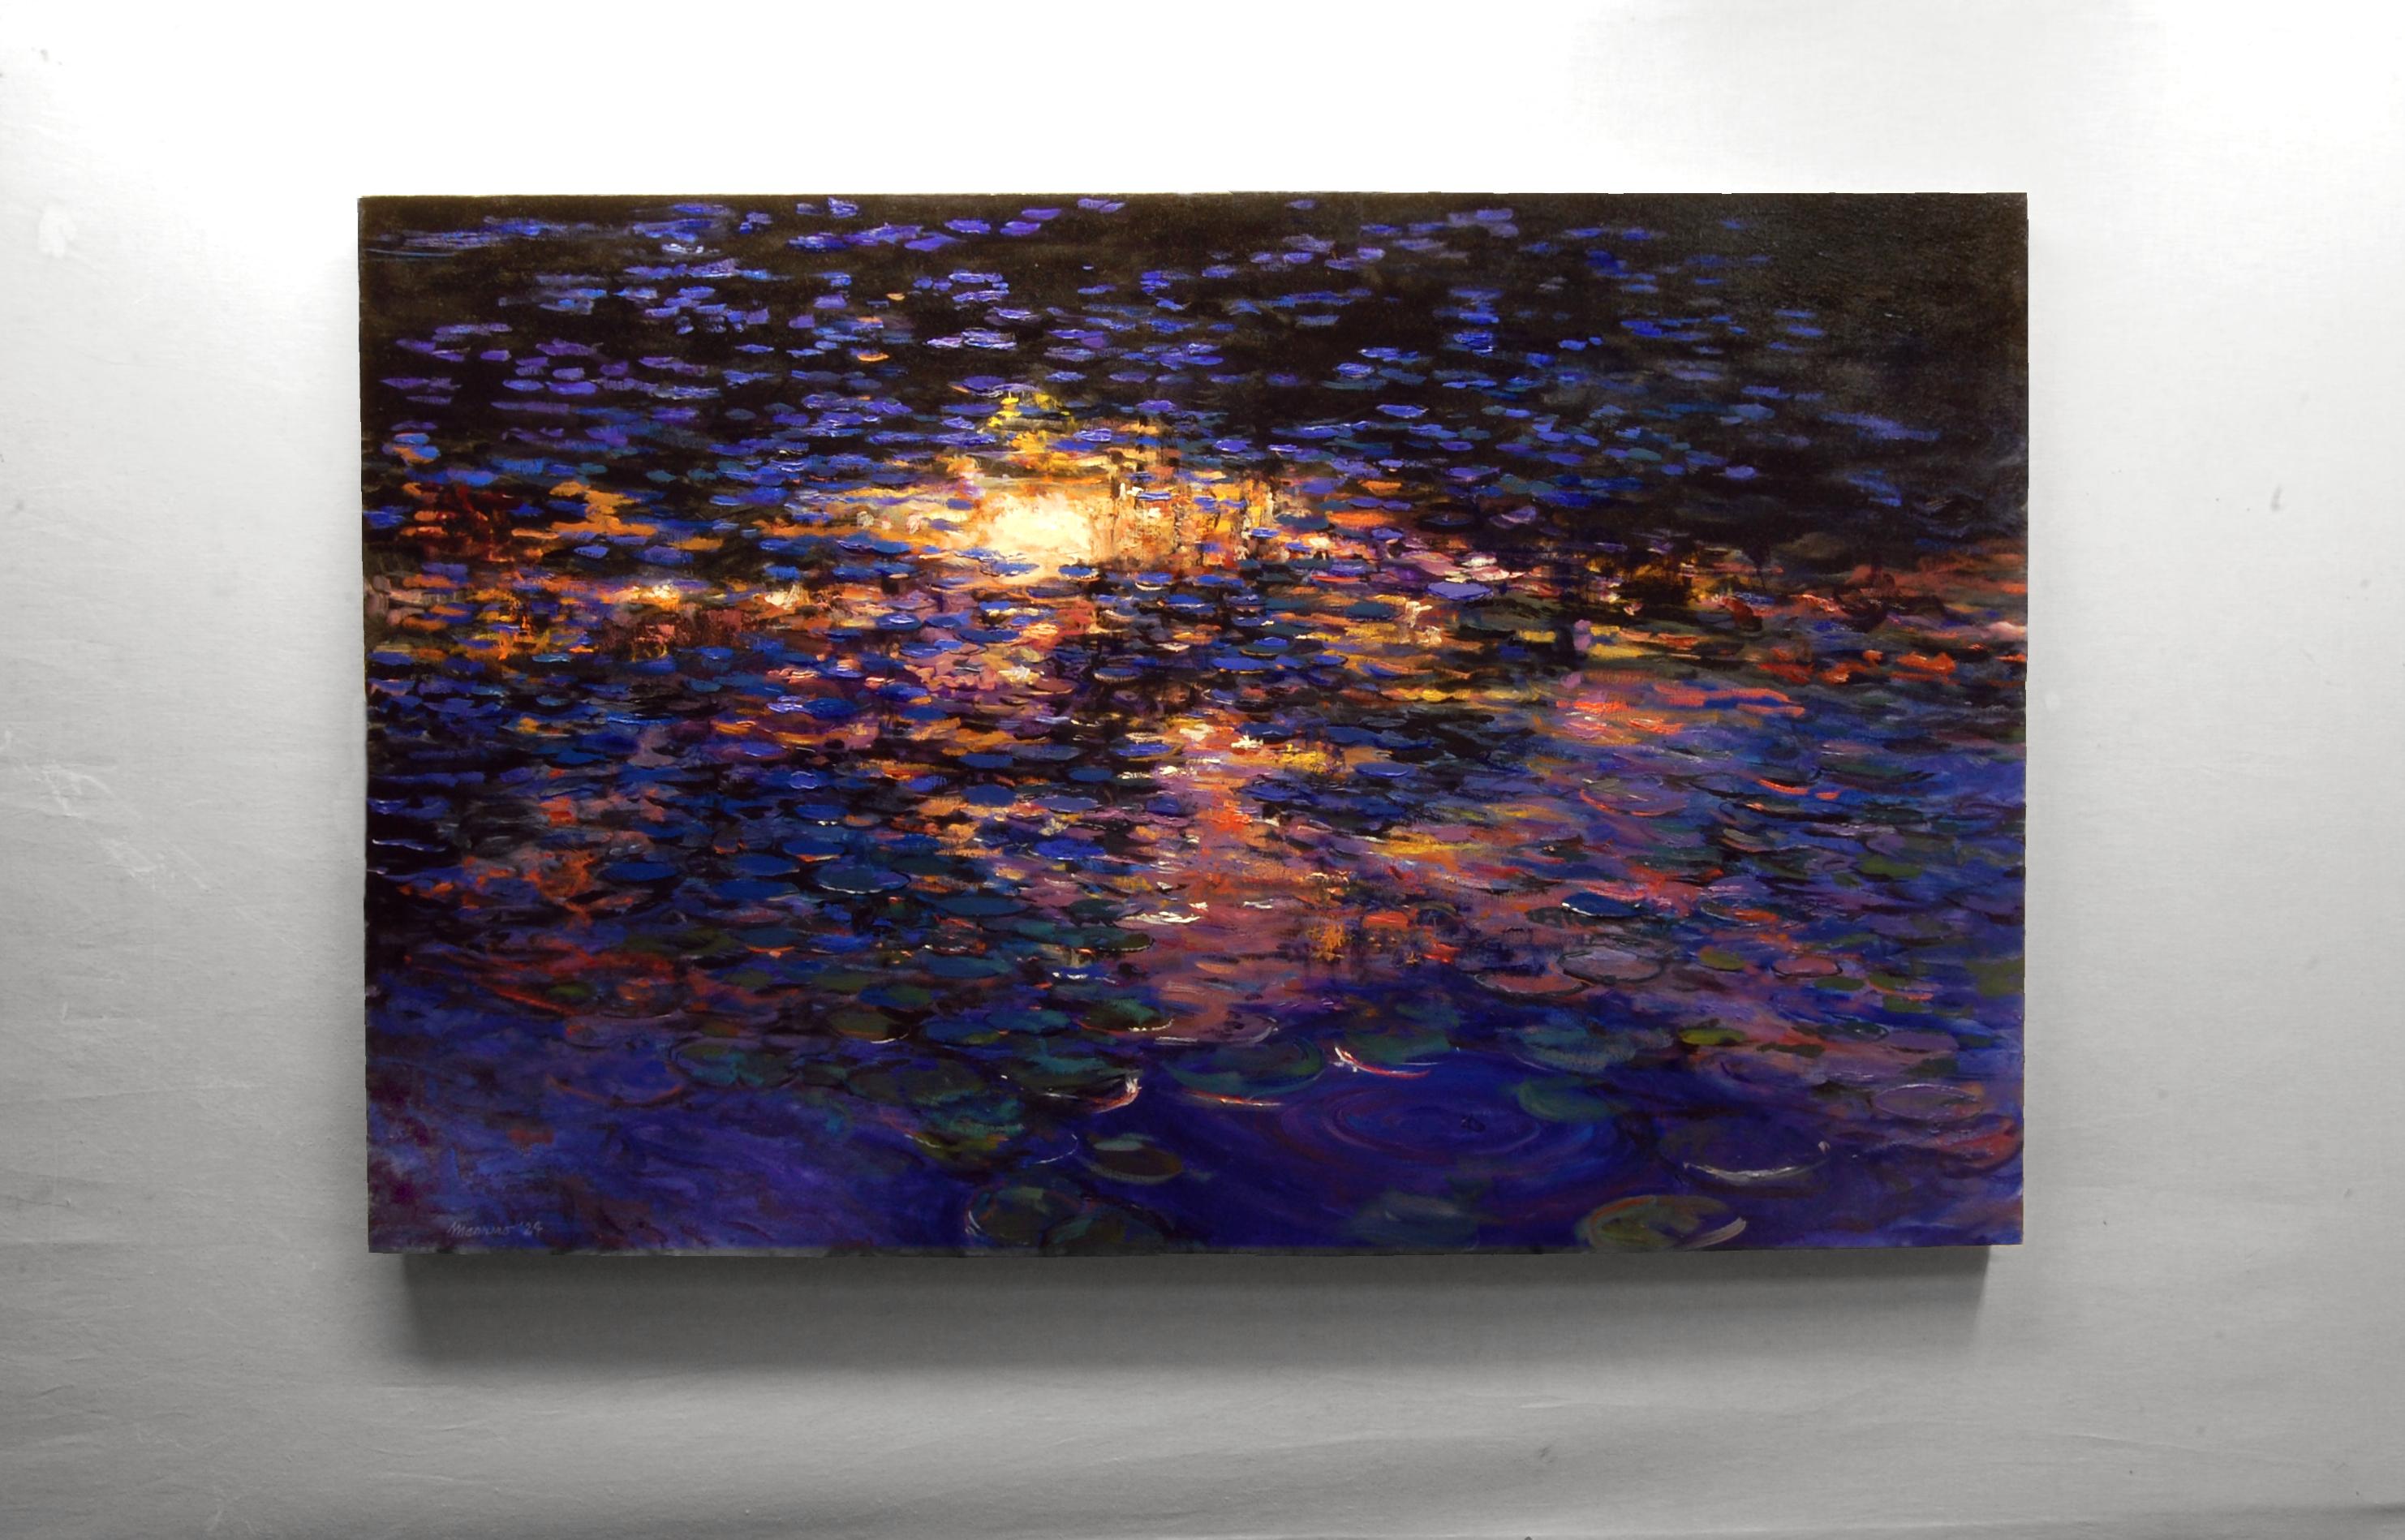 <p>Artist Comments<br>Working on the subject of water lilies and sunset reflections, artist Onelio Marrero portrays a pond mirroring the colors of the sky as night approaches, with trees silhouetted against the fiery sunset. The aquatic plants